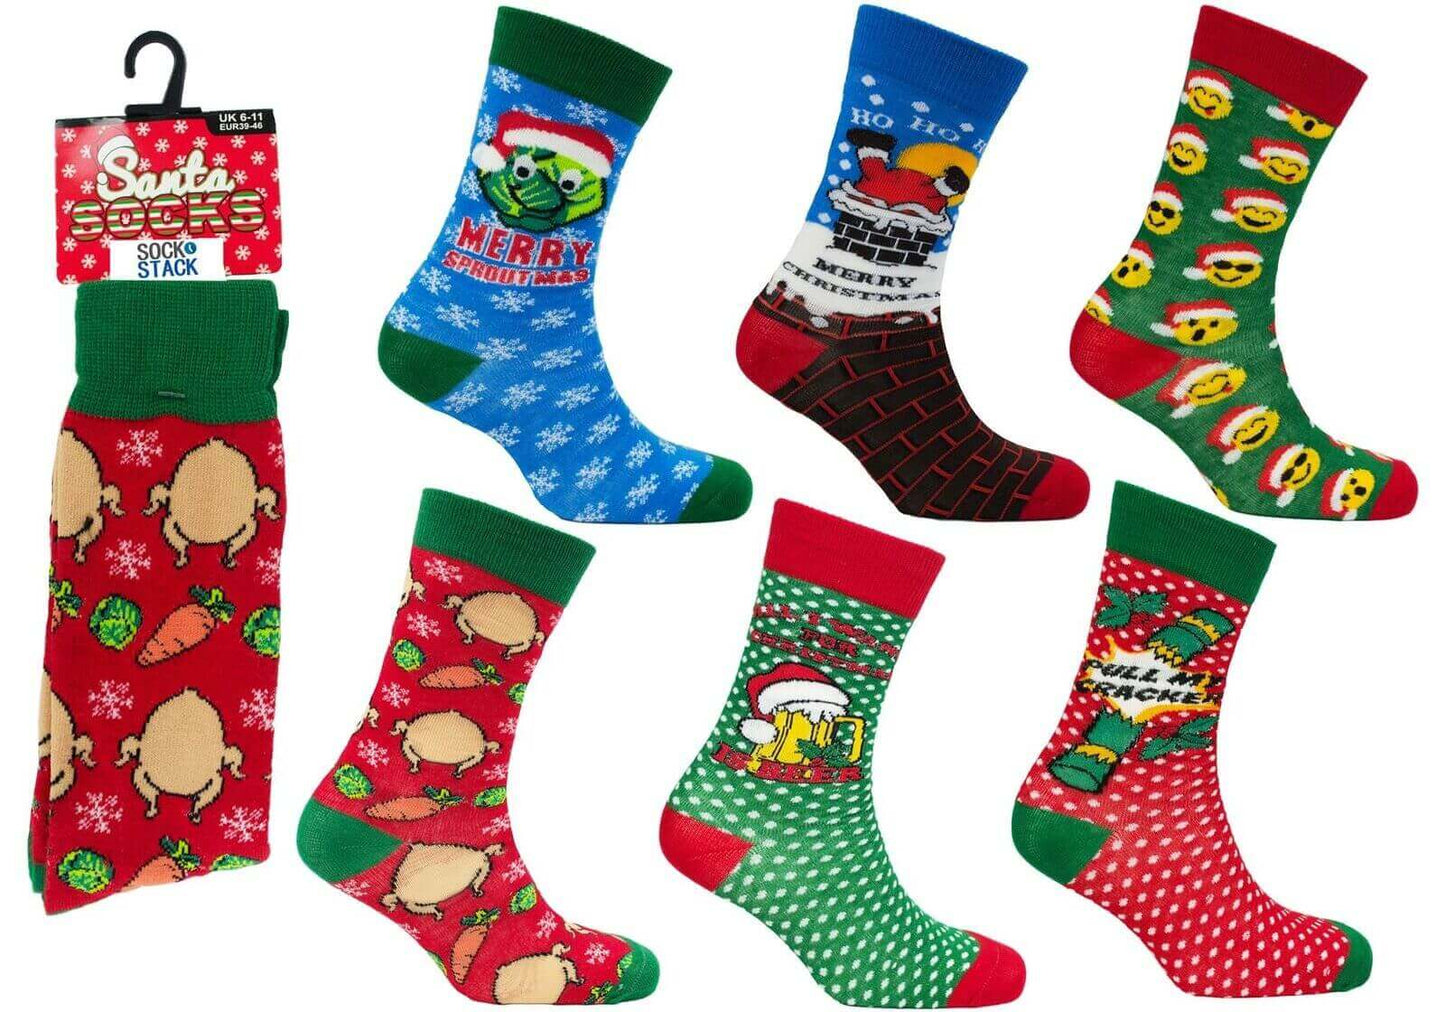 Pack Of 12 Men's Christmas Socks Novelty Xmas Stocking Filler. Buy now for £10.00. A Socks by Sock Stack. 6-11, assorted, beer, boys, christmas, comfortable, cotton, emoji, father christmas, festive, grinch, home, mens, mens socks, novelty, polyester, san